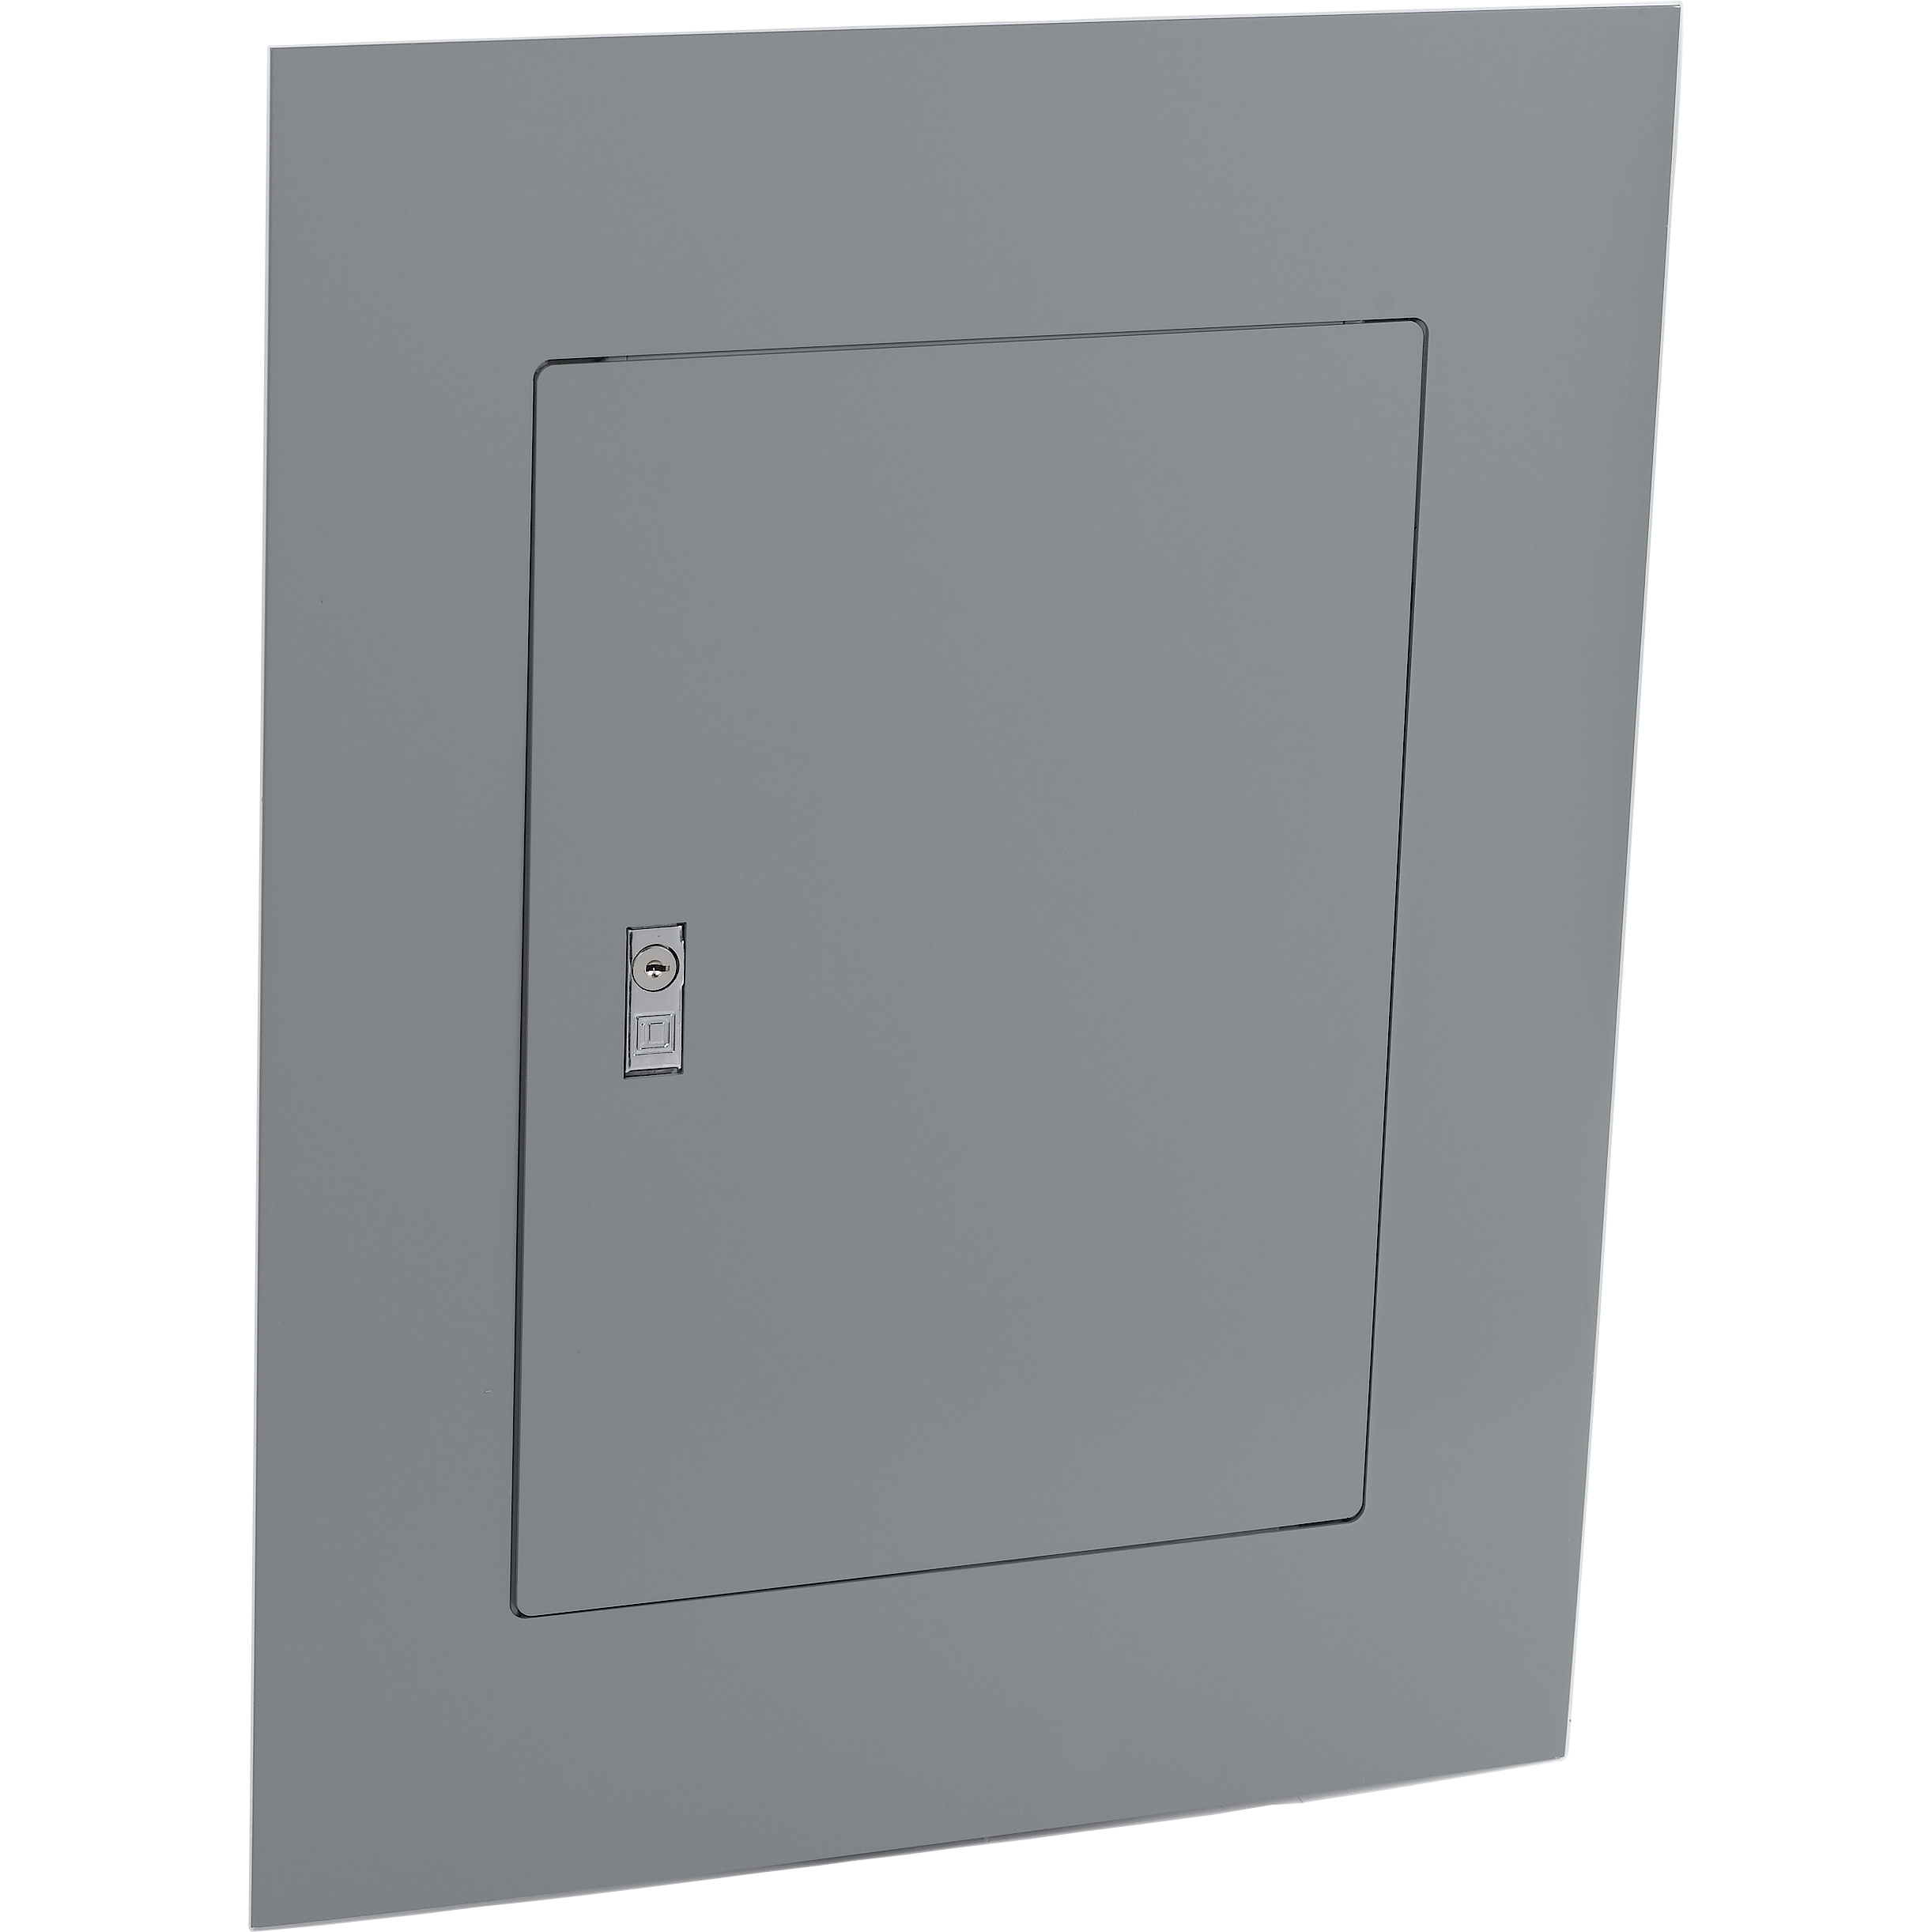 Enclosure Cover, NQNF, Type 1, Surface, 20x23in